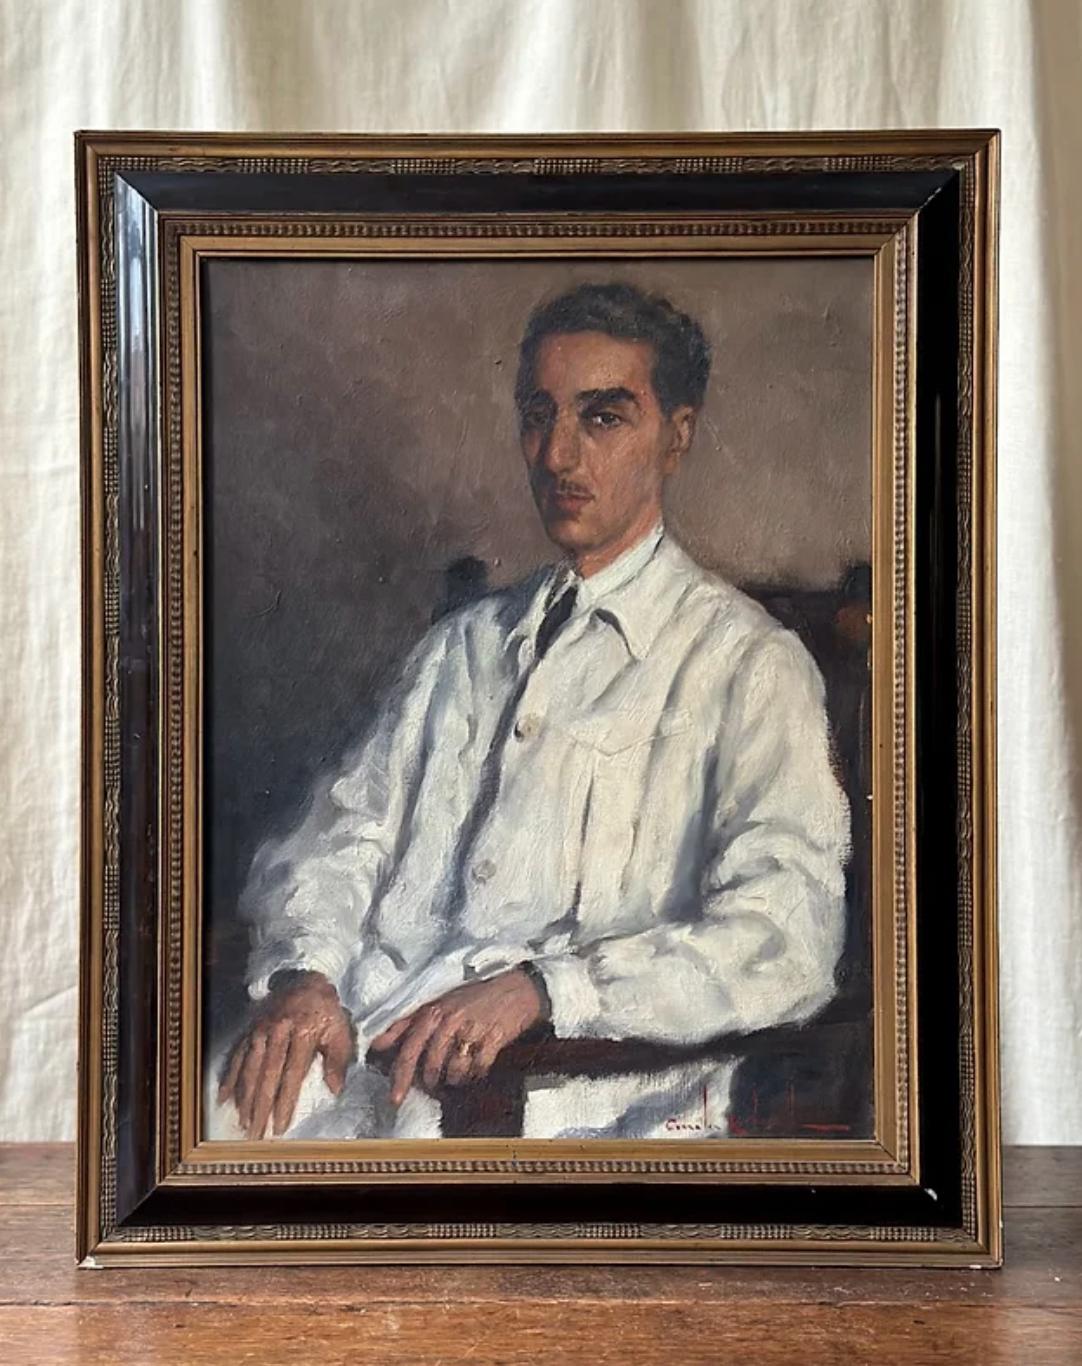 Portrait Of Dr. Josep Sarró i Condeminas By Rossend Gonzalez Carbonell, Signed.

Rosendo Gonzalez Carbonell (1910 - 1984) Spanish Artist.

Celebrated for his highly atmospheric interiors and portraits, Rosendo Gonzalez Carbonell was a Spanish